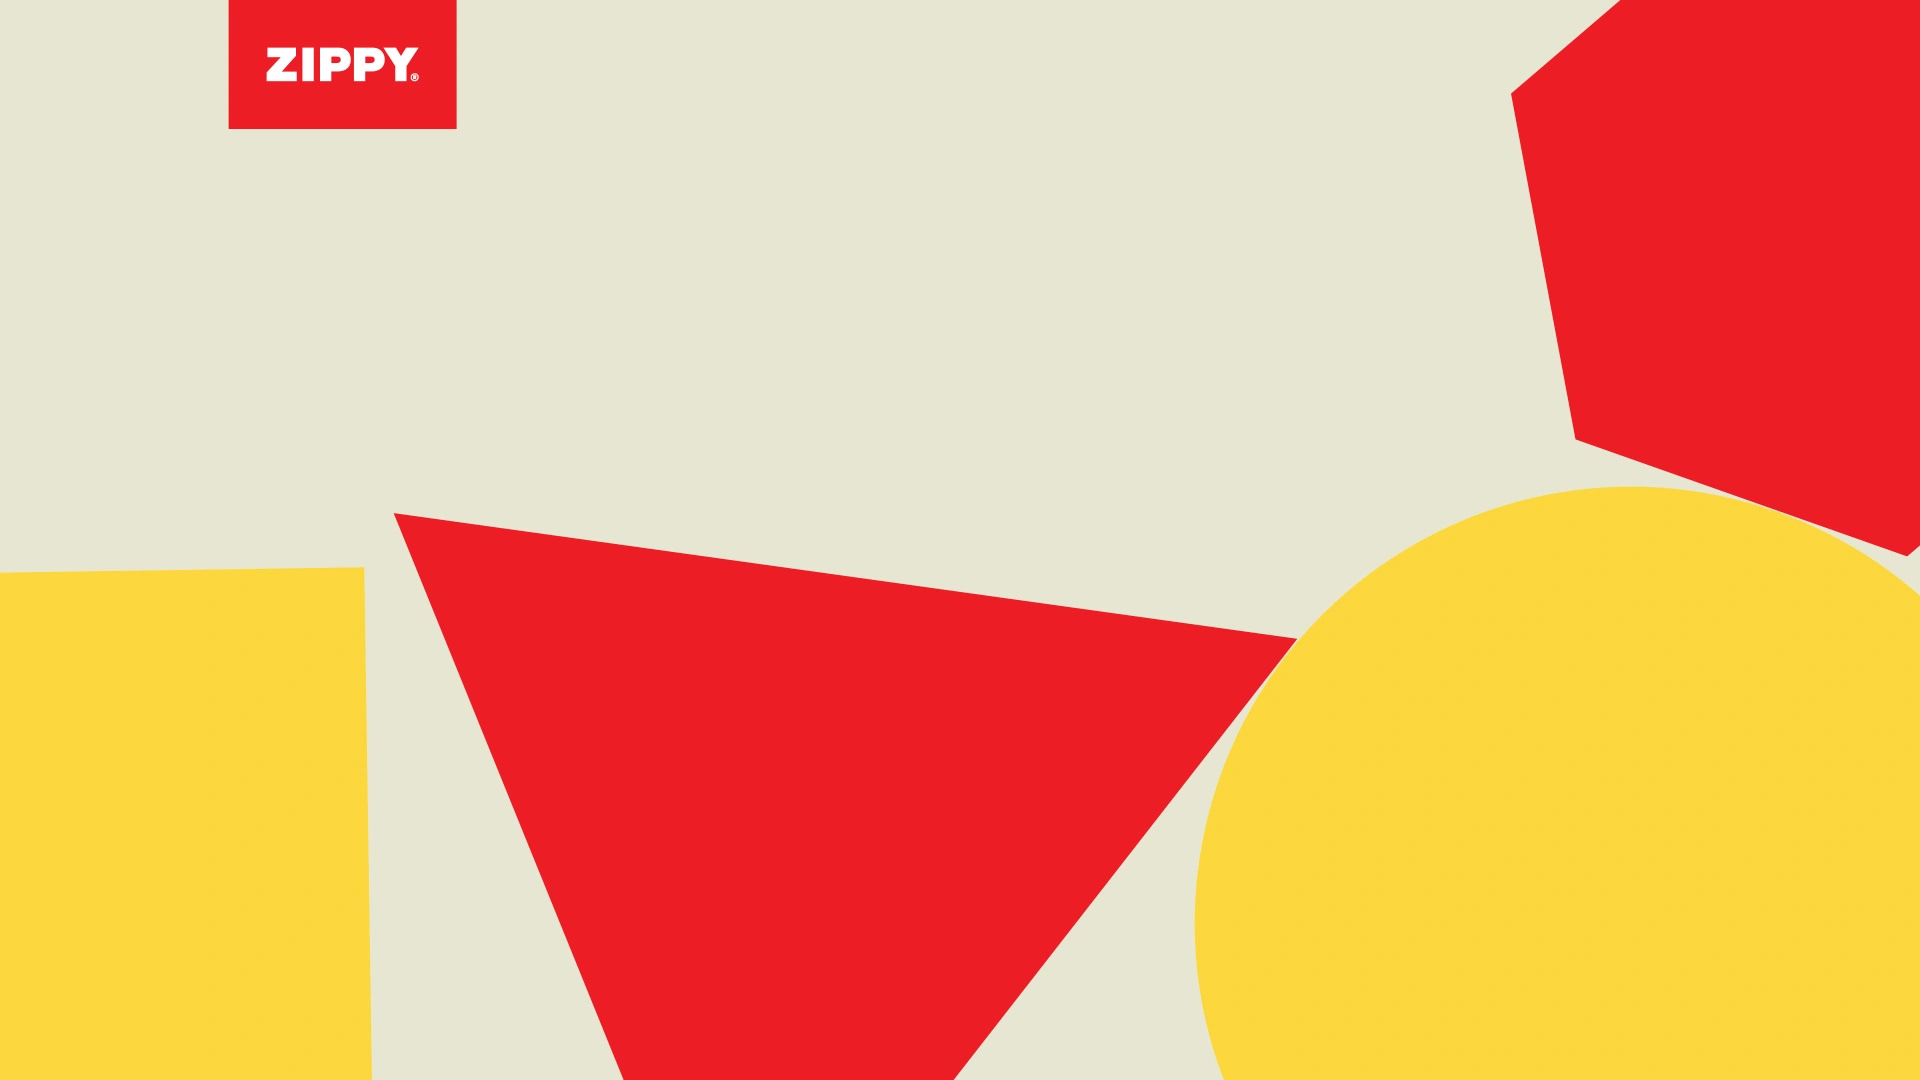 Image taken from the Zippy motion film, a visual composition with a red hexagon and triangle, and a yellow square and circle.